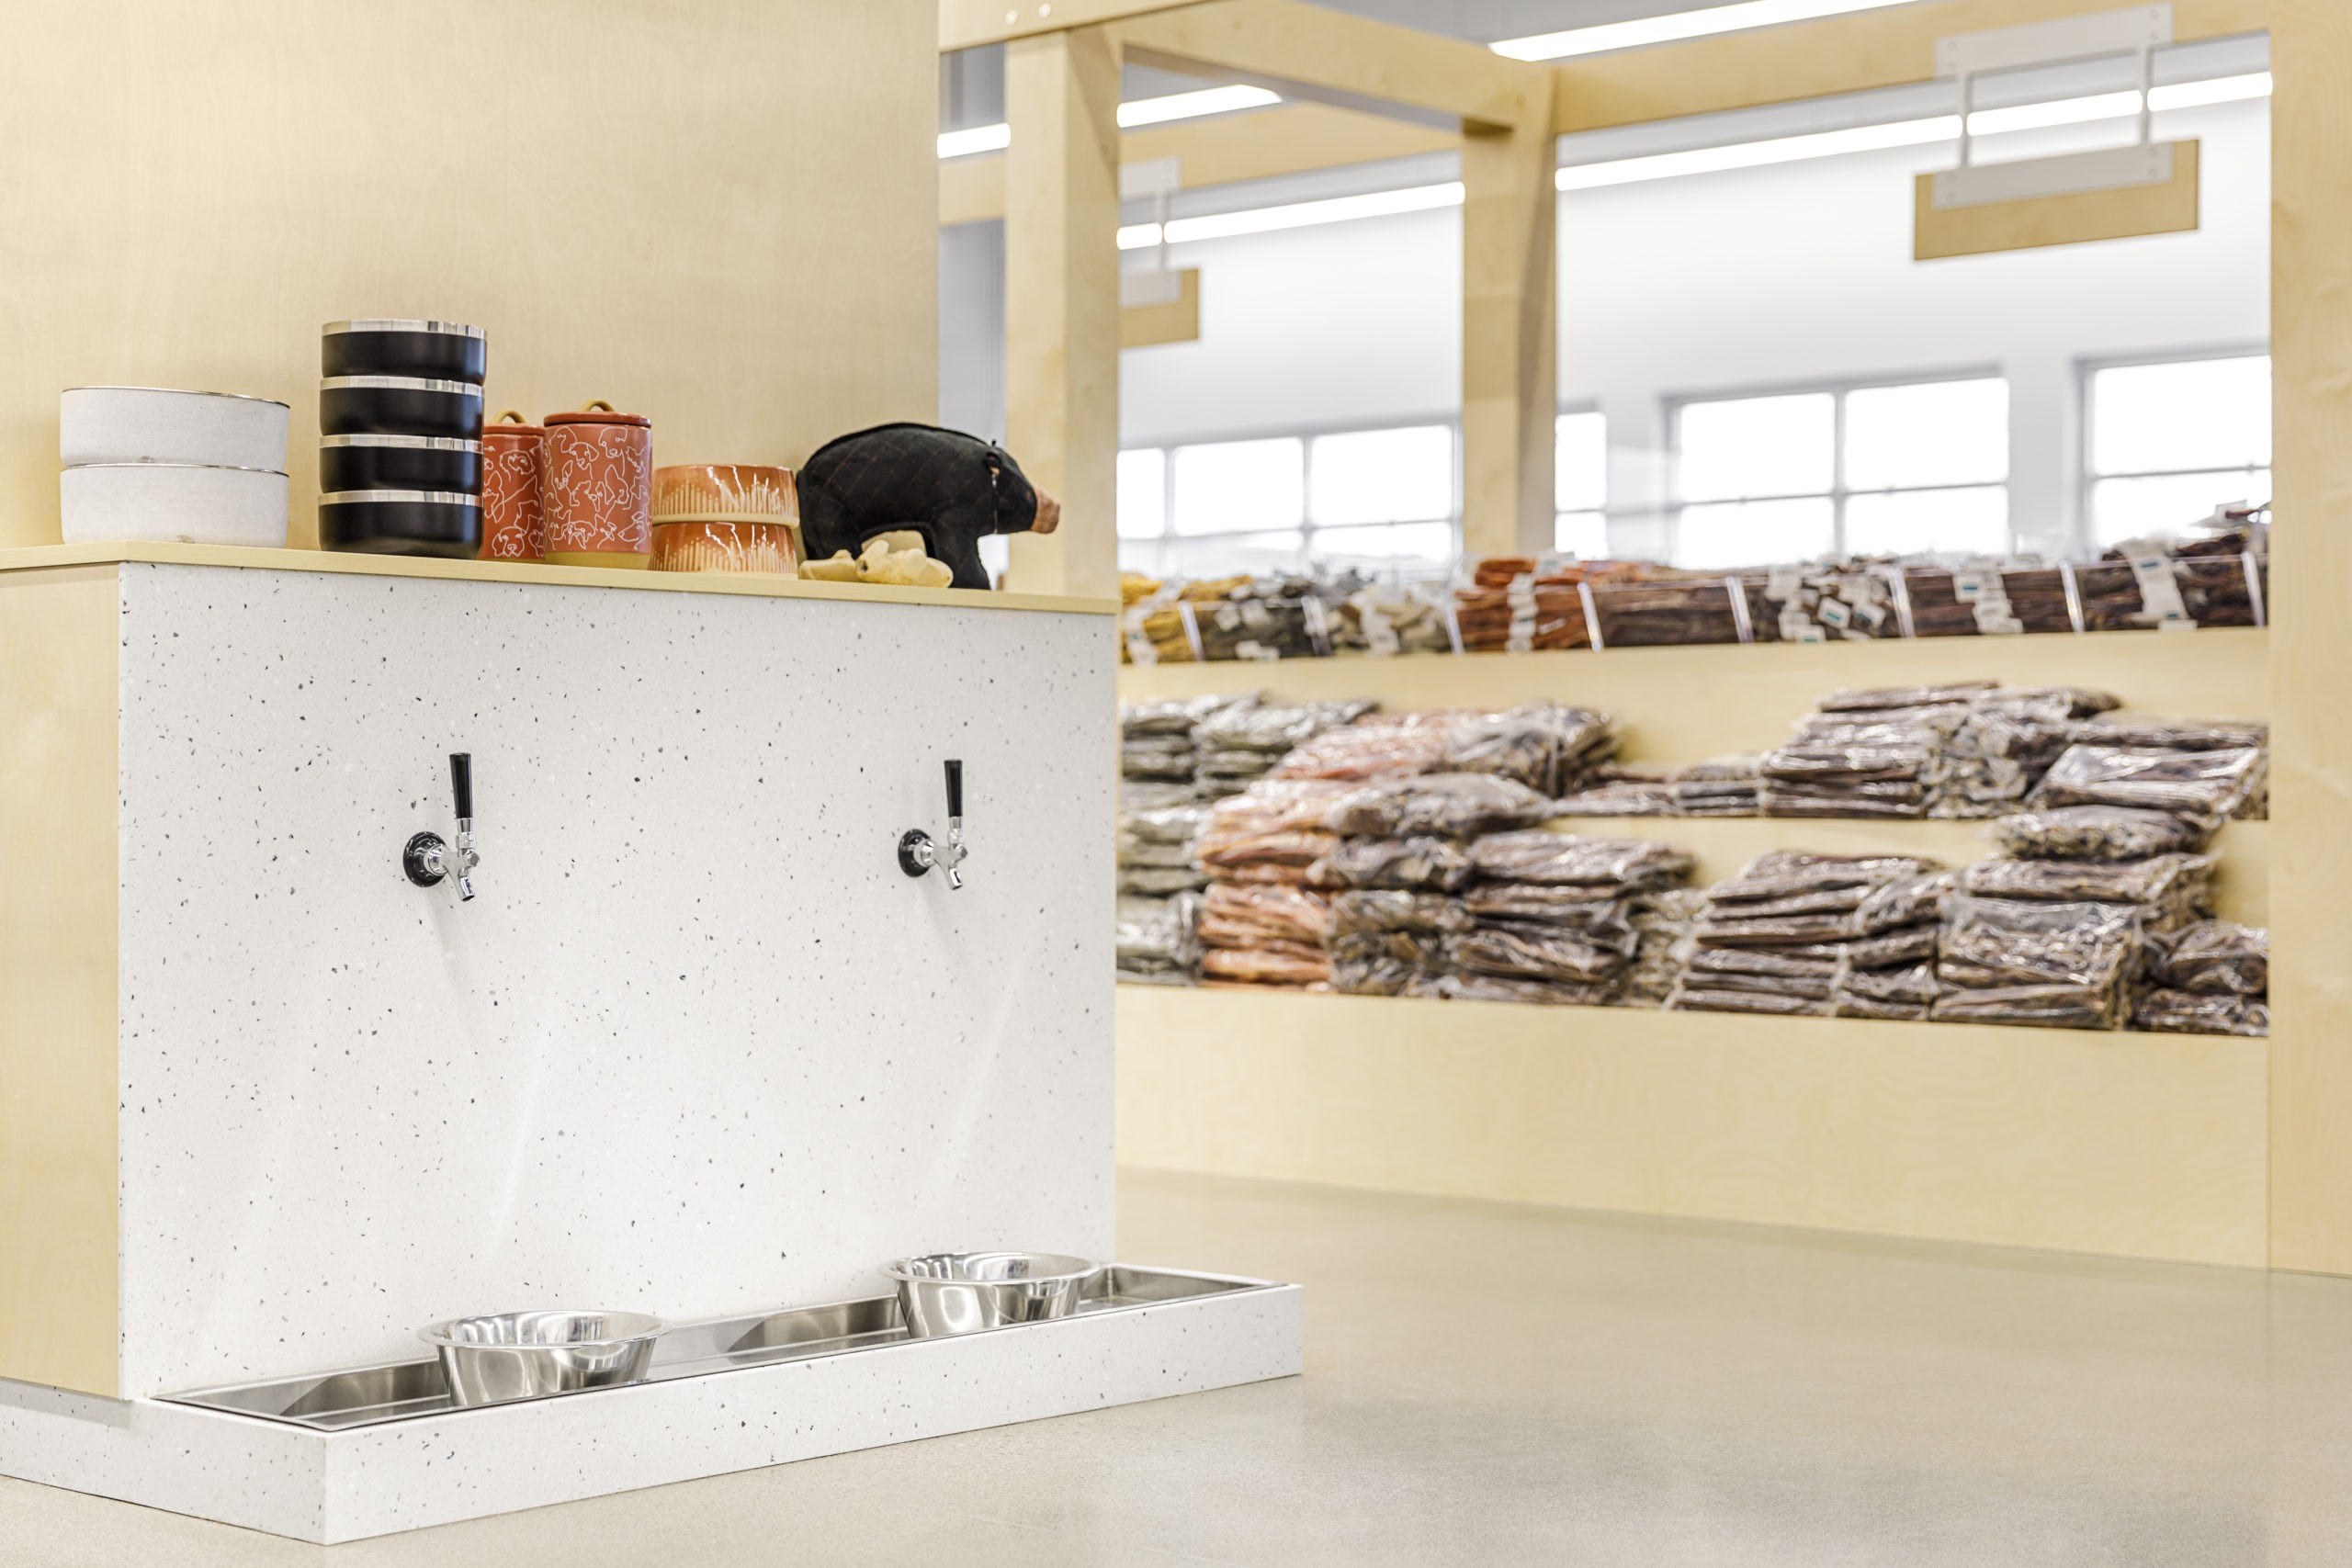 water fountain for pets, retail store interior design, Homes Alive Pets Langley in Langley B.C., by Cutler